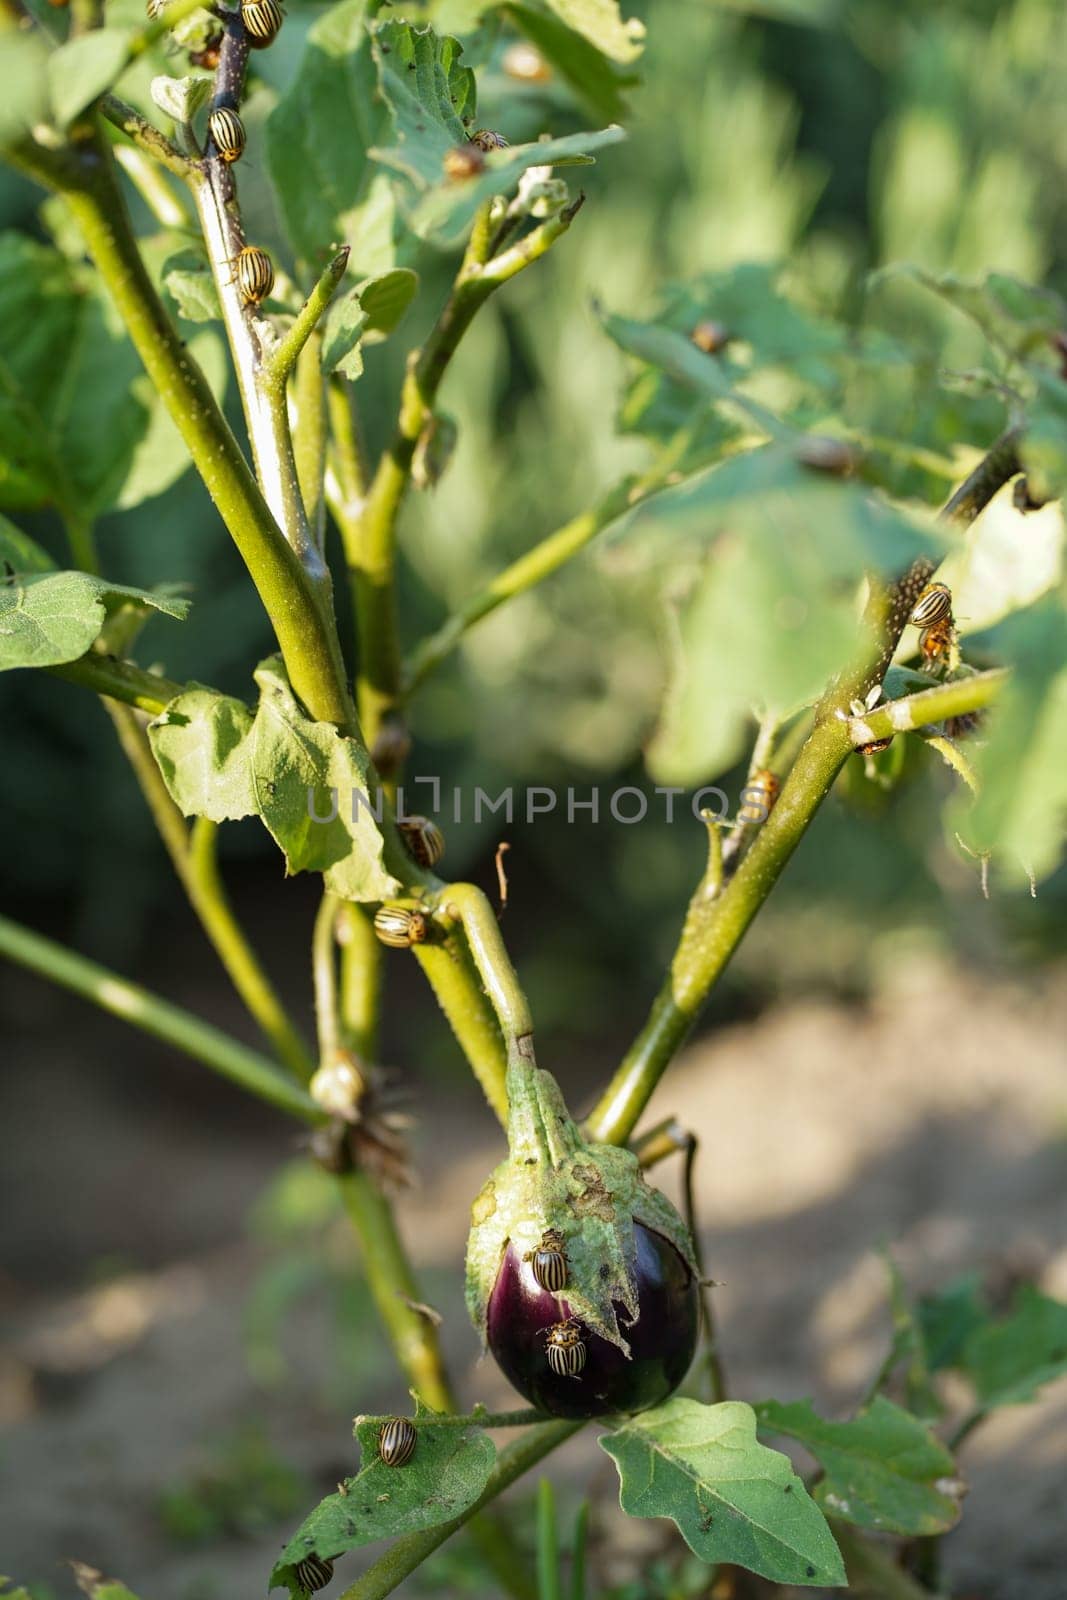 Potato or Colorado beetle on eggplant. This insect can damage the leaves and fruits of eggplant.